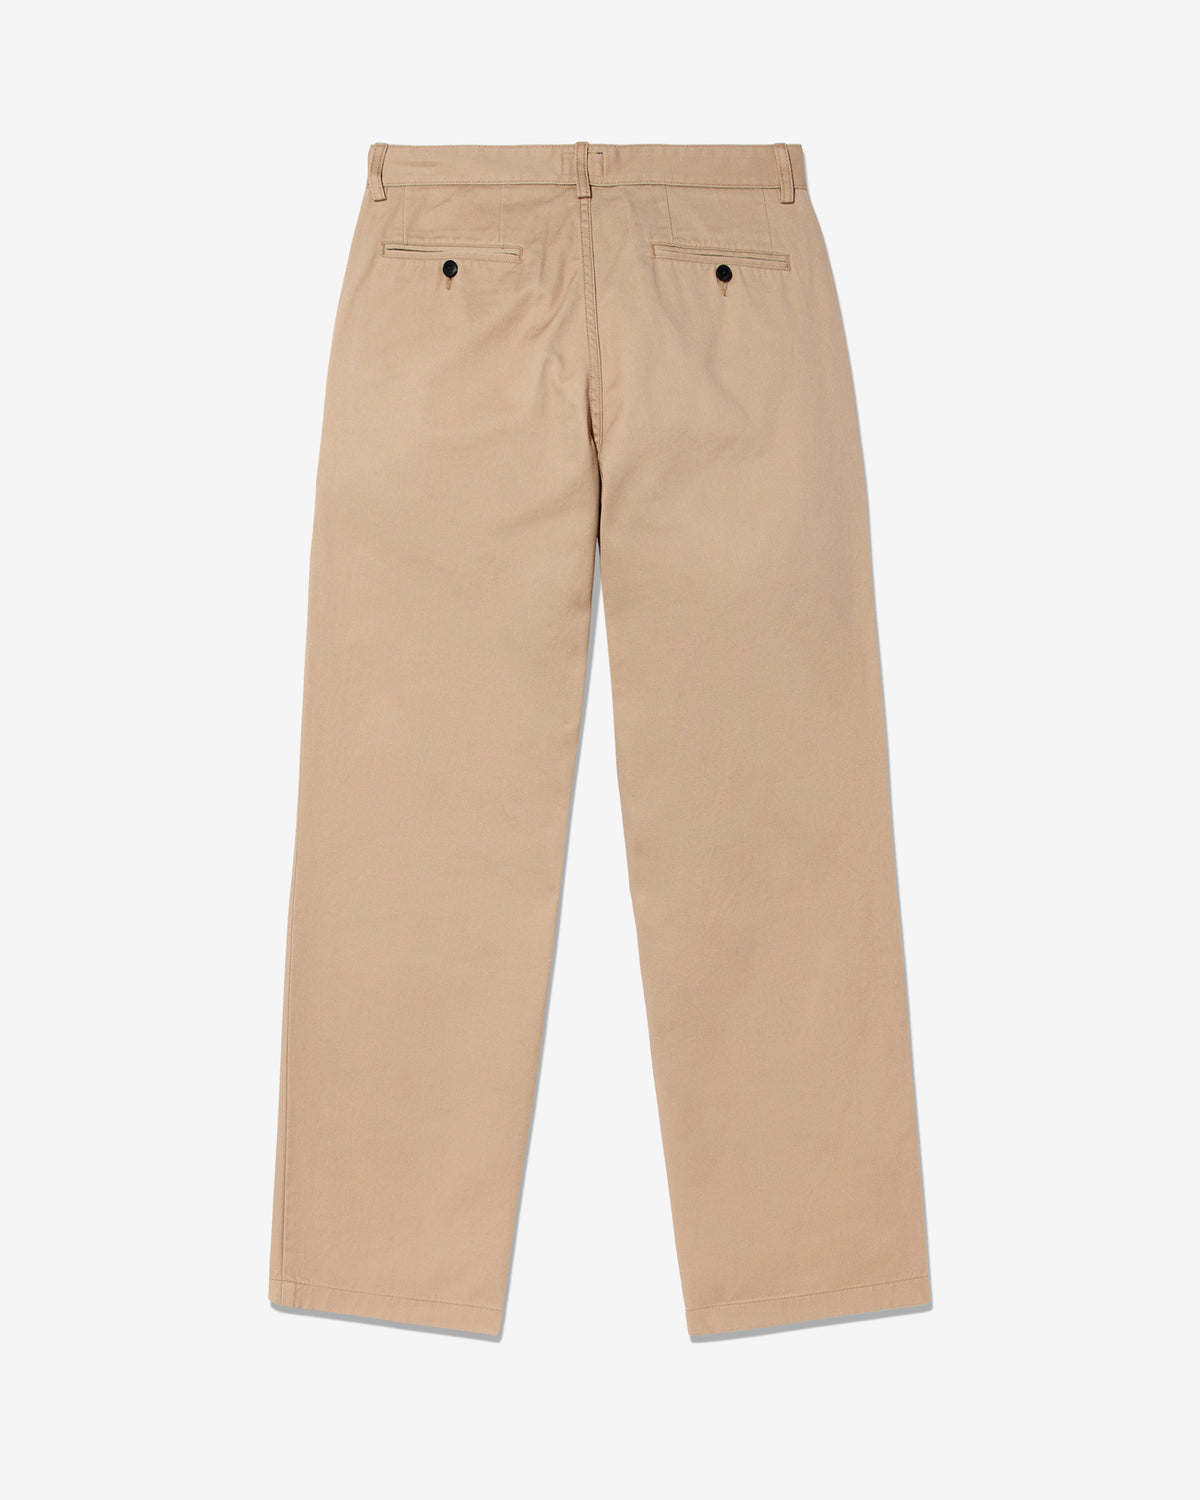 Twill Double-Pleat Pant